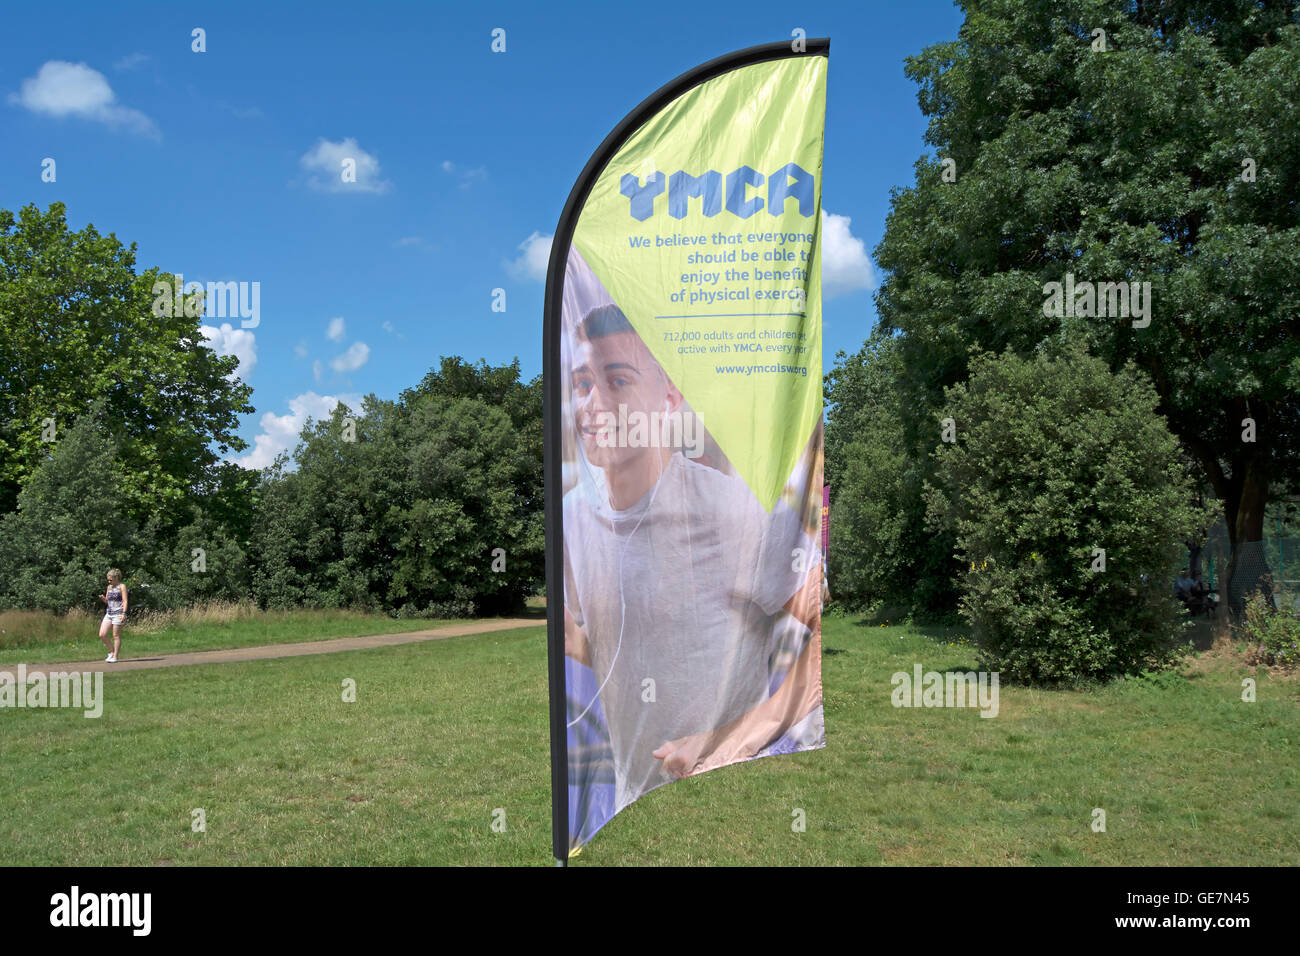 Ymca London High Resolution Stock Photography and Images - Alamy